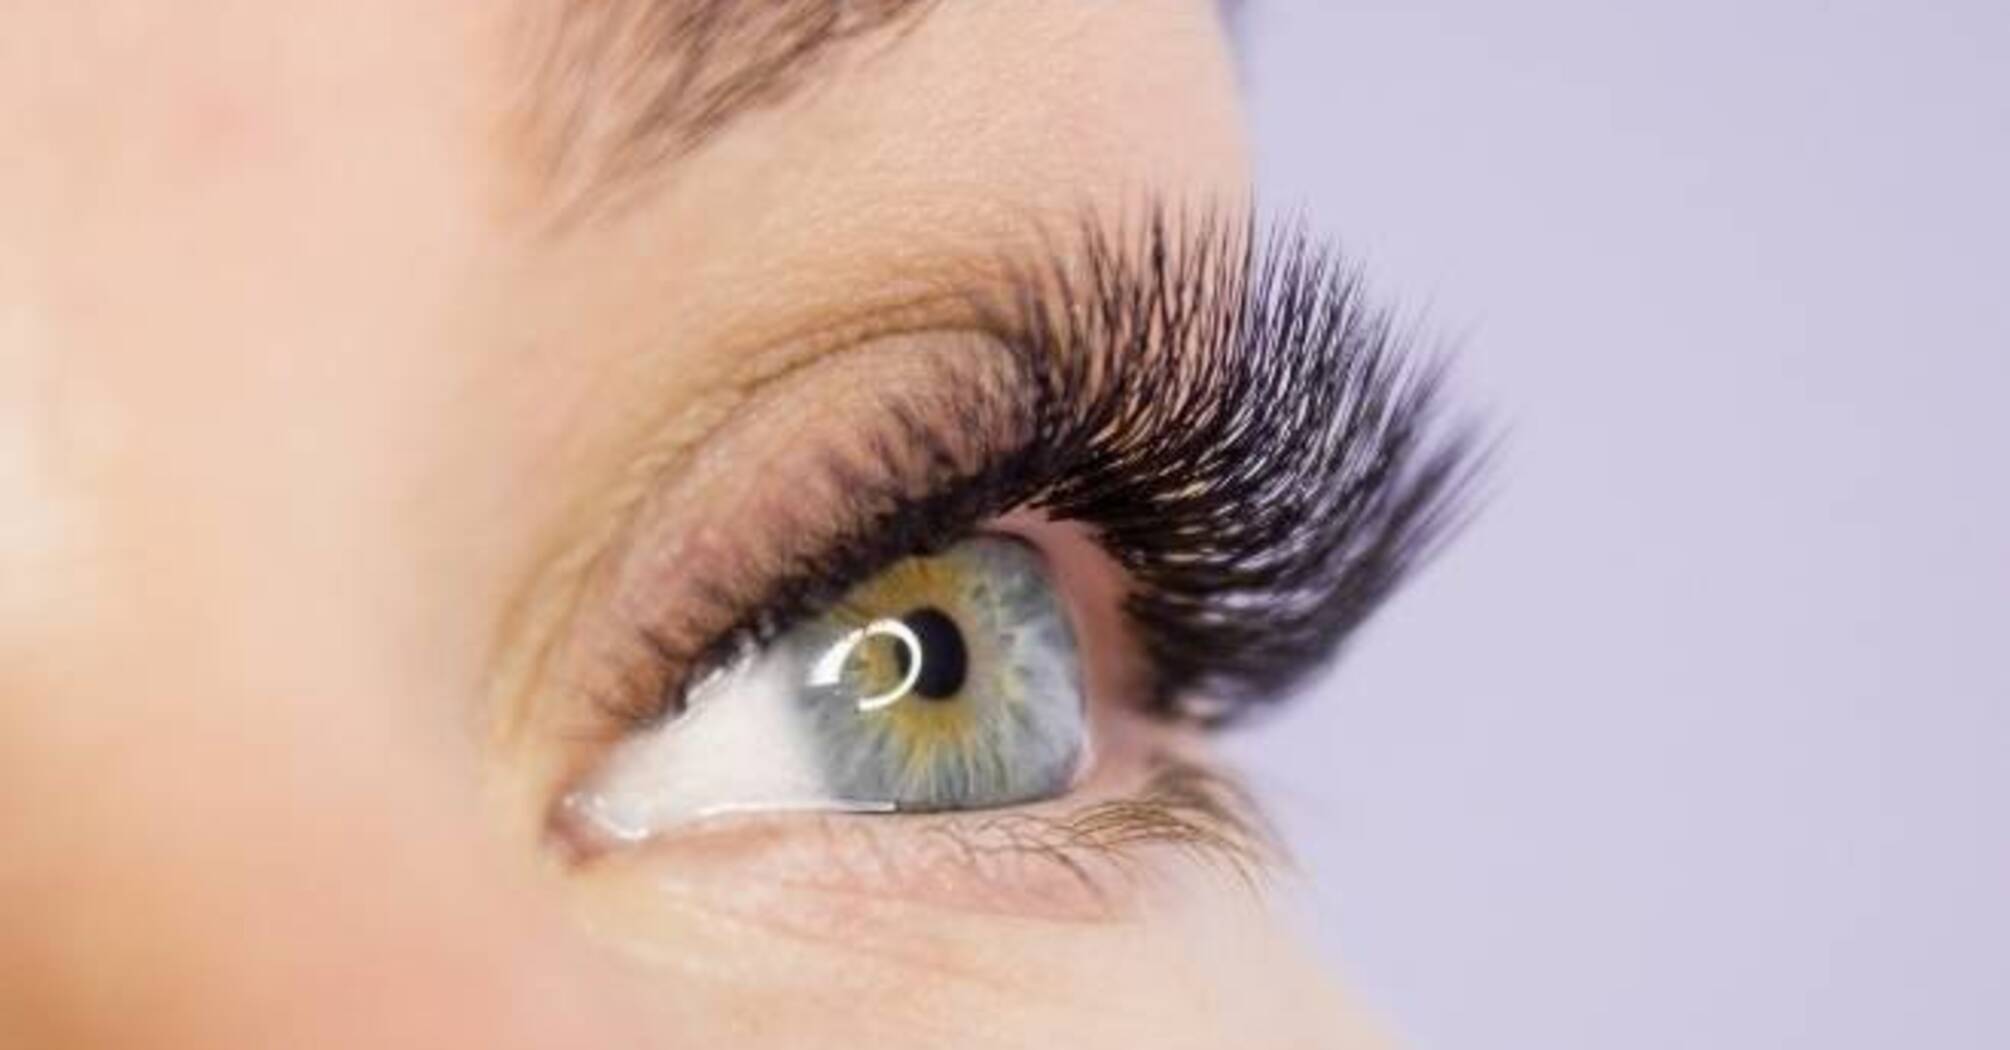 Advantages and disadvantages of eyelash extensions